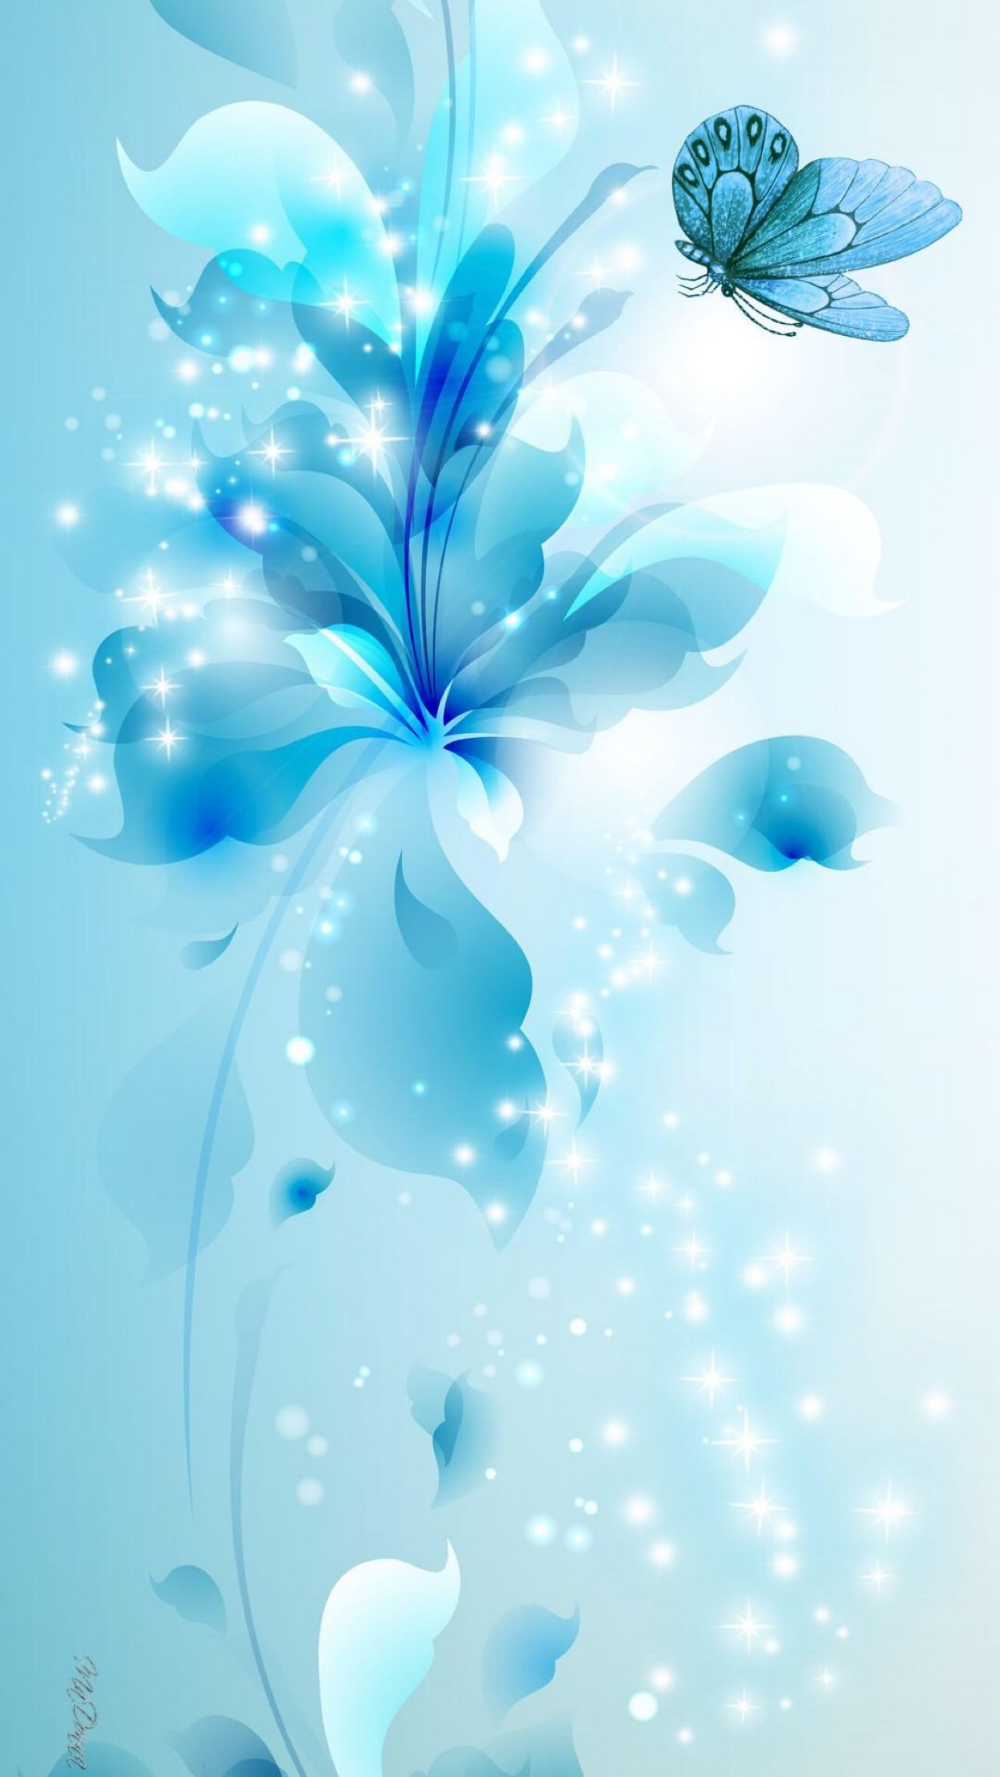 Blue, Turquoise, light, abstract, butterfly, flowers, apple, wallpaper, iPhone, clean, bea. Blue flower wallpaper, Best flower wallpaper, Blue butterfly wallpaper